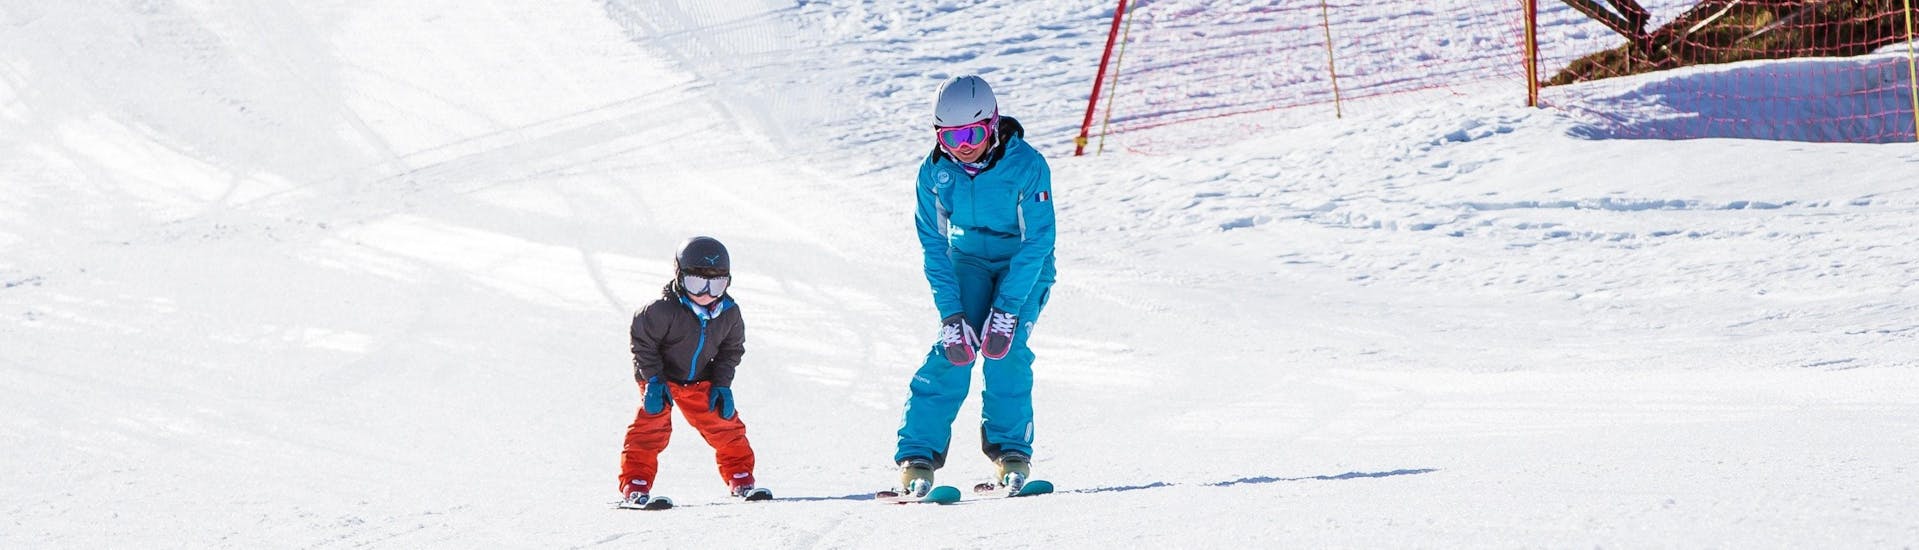 A ski instructor from the ski school ESI Ski Family in Risoul is skiing alongside a child during their Private Ski Lessons for Kids of All Levels - Morning.